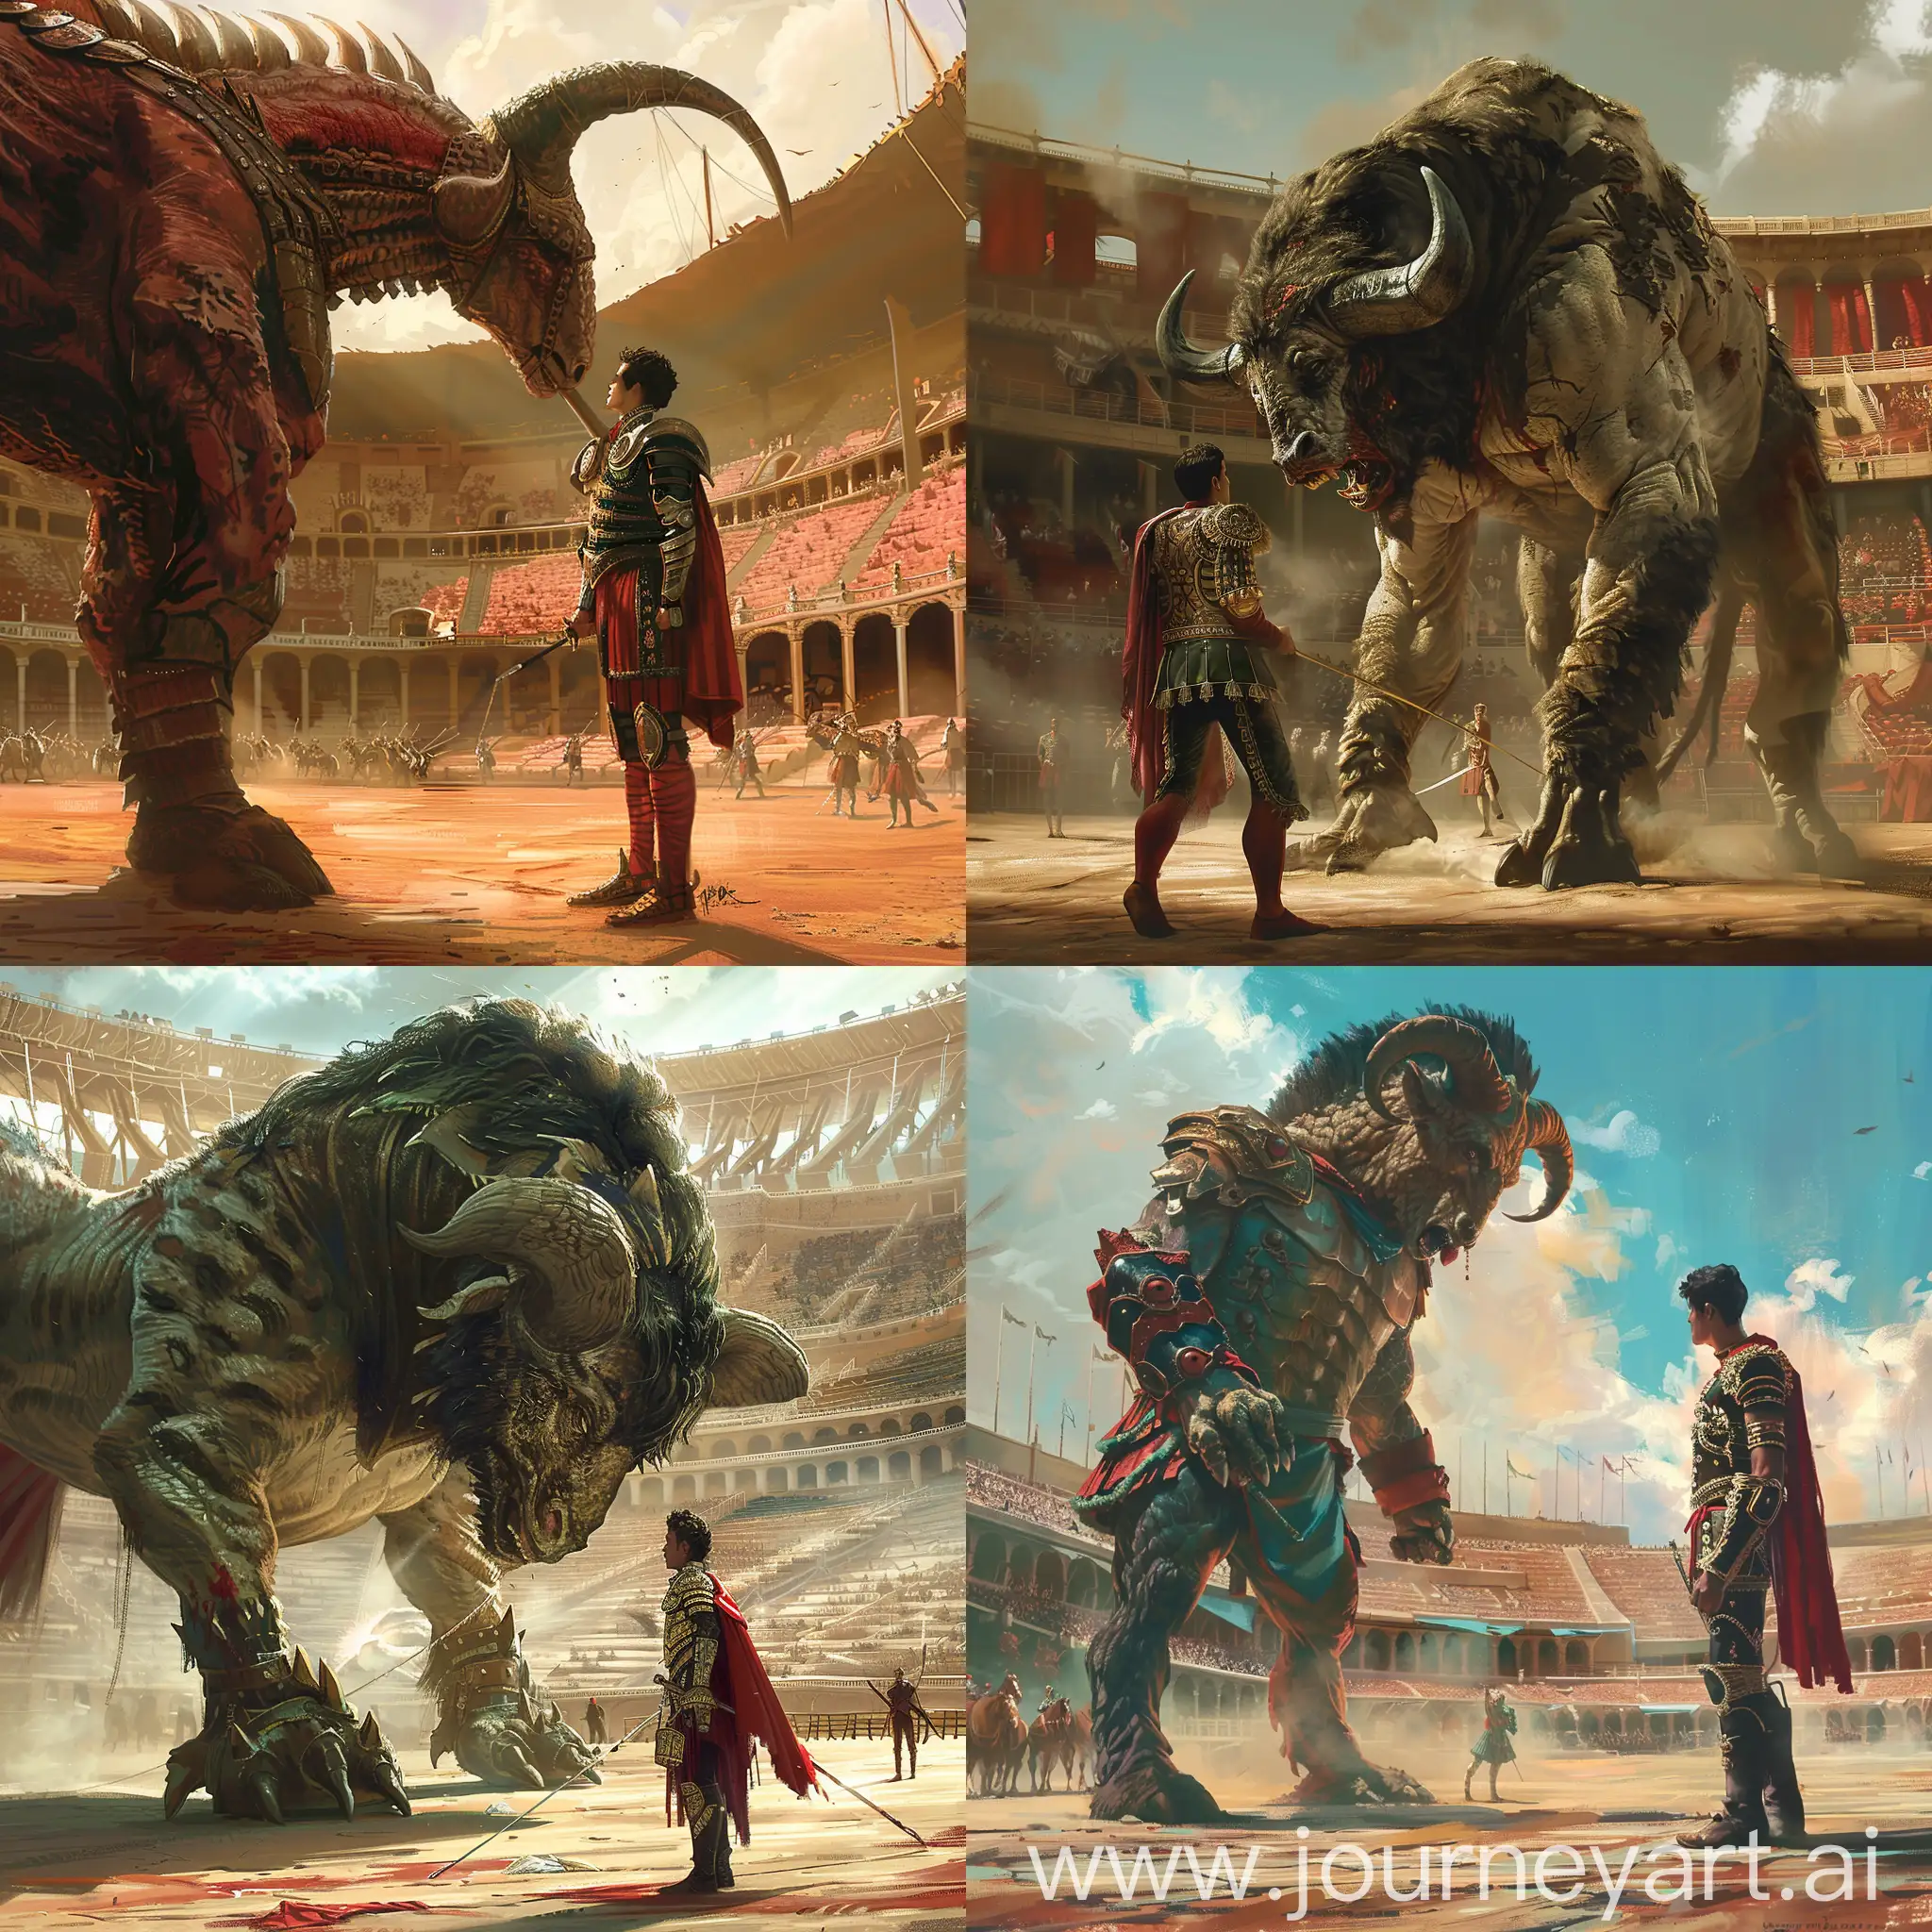 Fantasy artwork showing a matador face to face with a beast creature,majestic arena ,captivating  shot